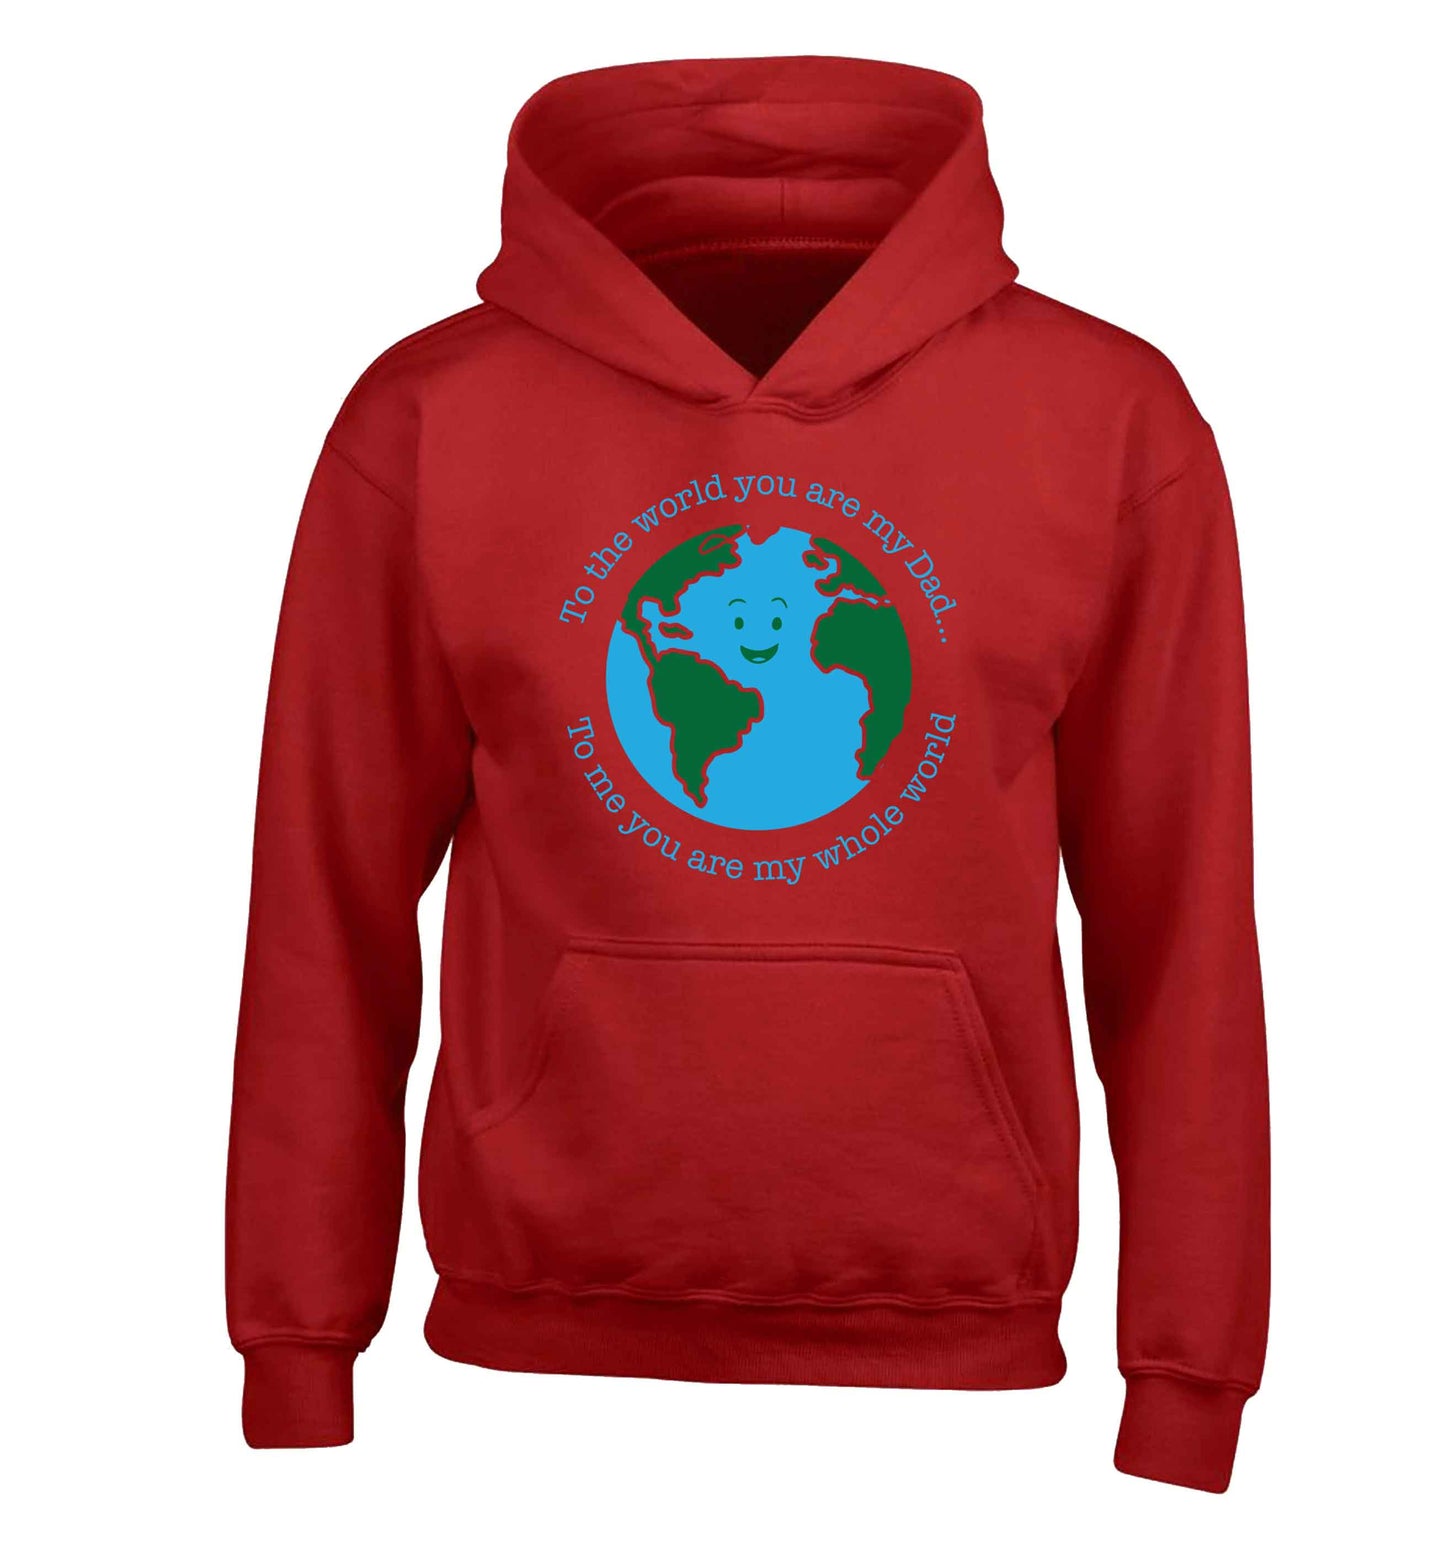 To the world you are my dad, to me you are my whole world children's red hoodie 12-13 Years